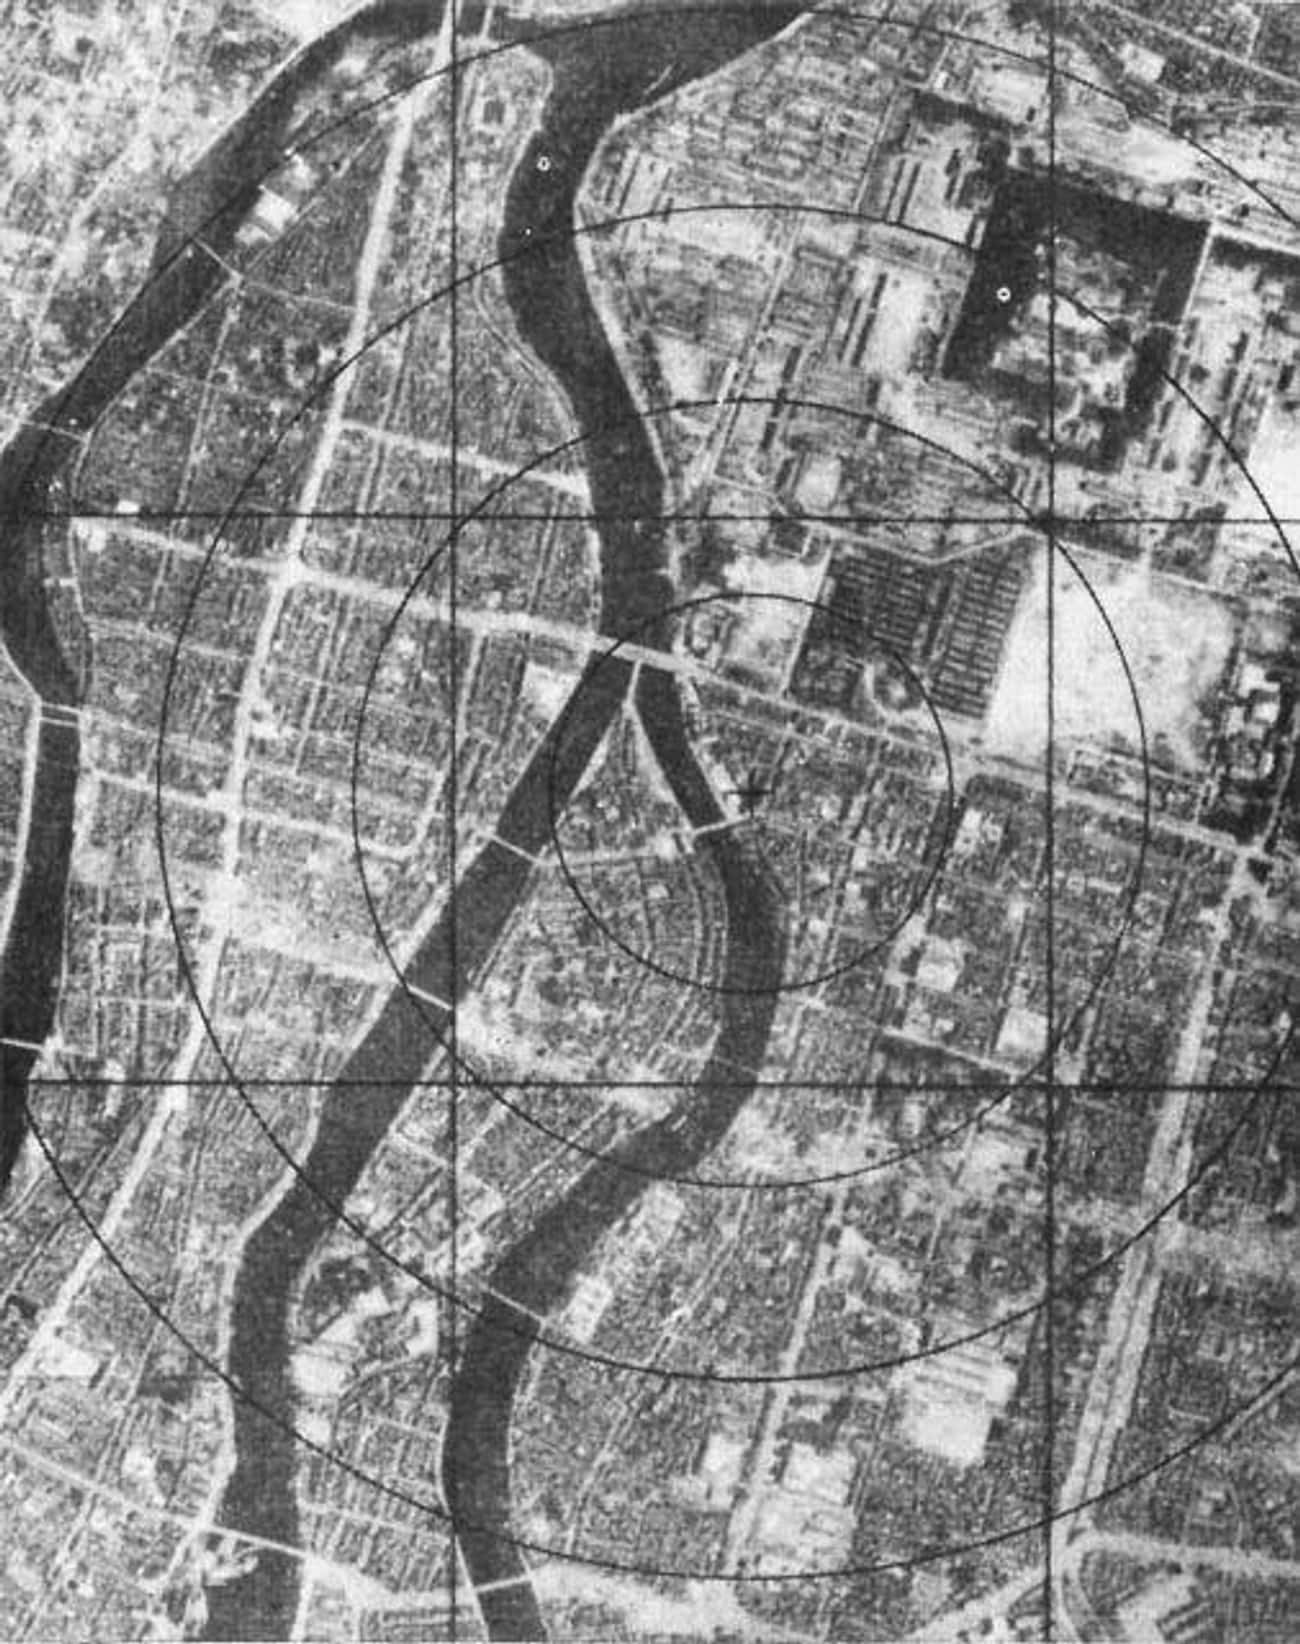 07:00 - Japanese Officials Raise The Air Raid Siren, But Many Of Hiroshima’s Citizens Ignore The Alarm